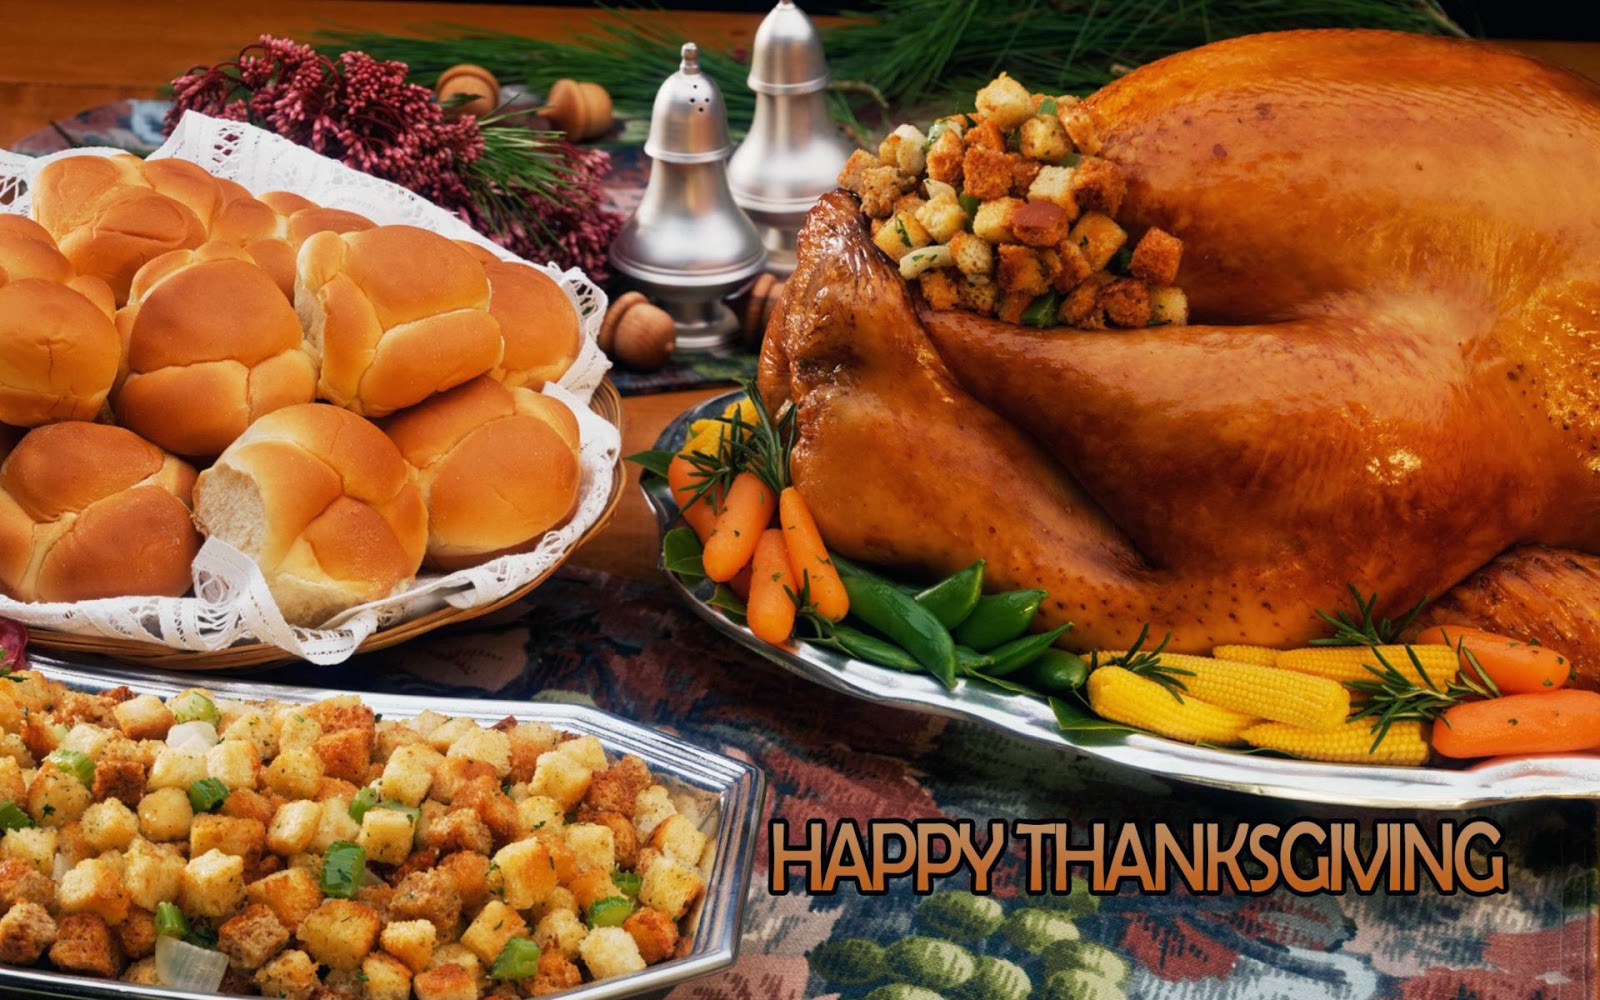 All new wallpaper : Thanksgiving 2013 Wallpapers